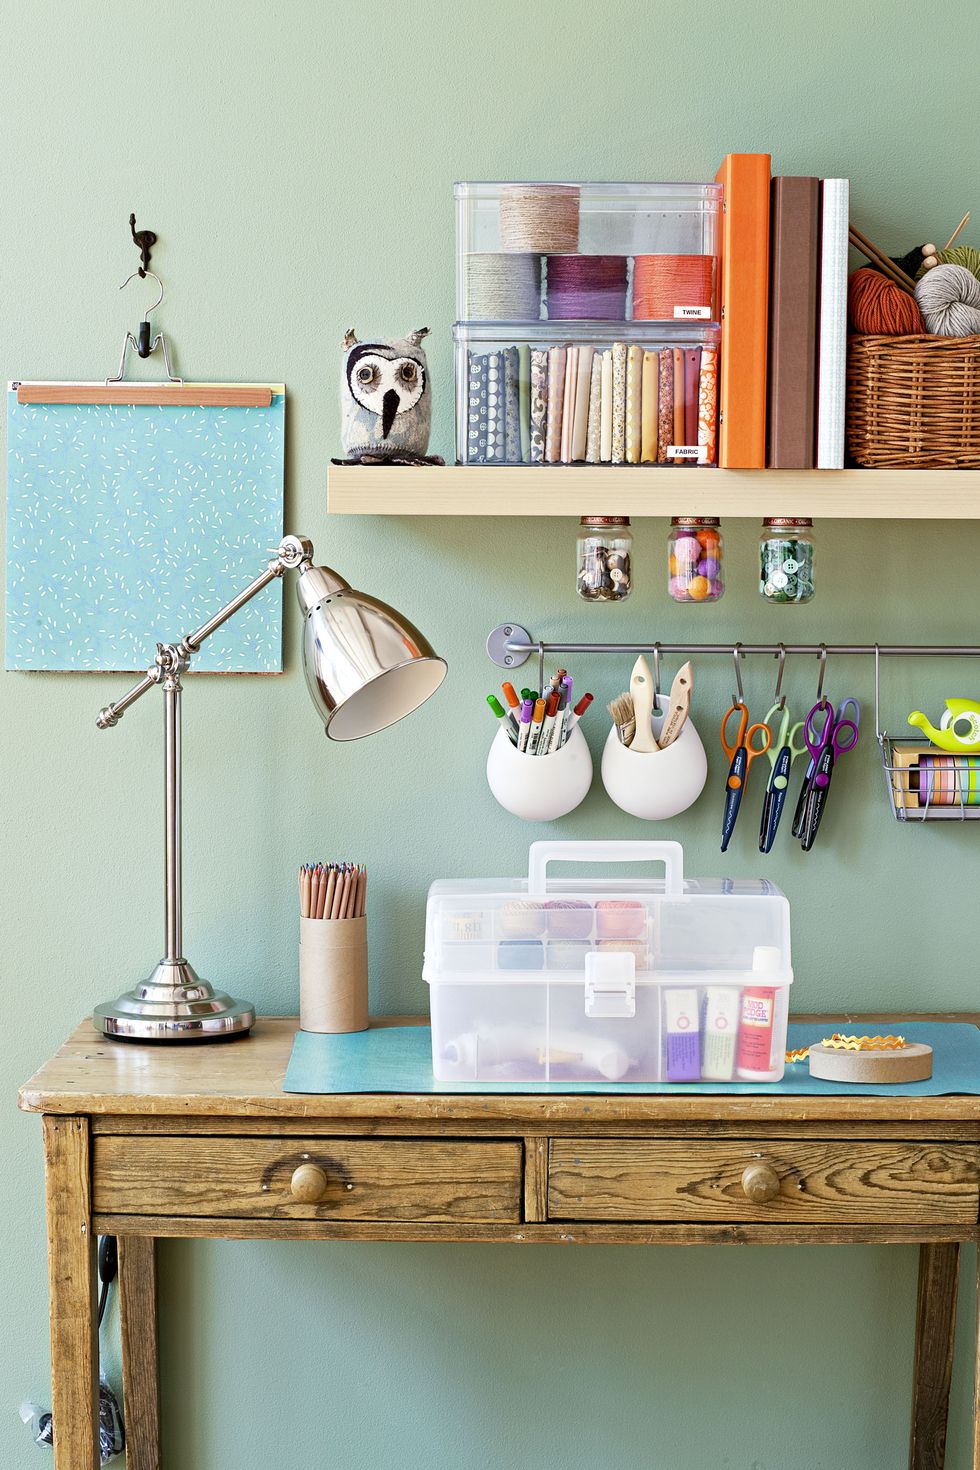 5 Quick Ways to Organize Your Home Office